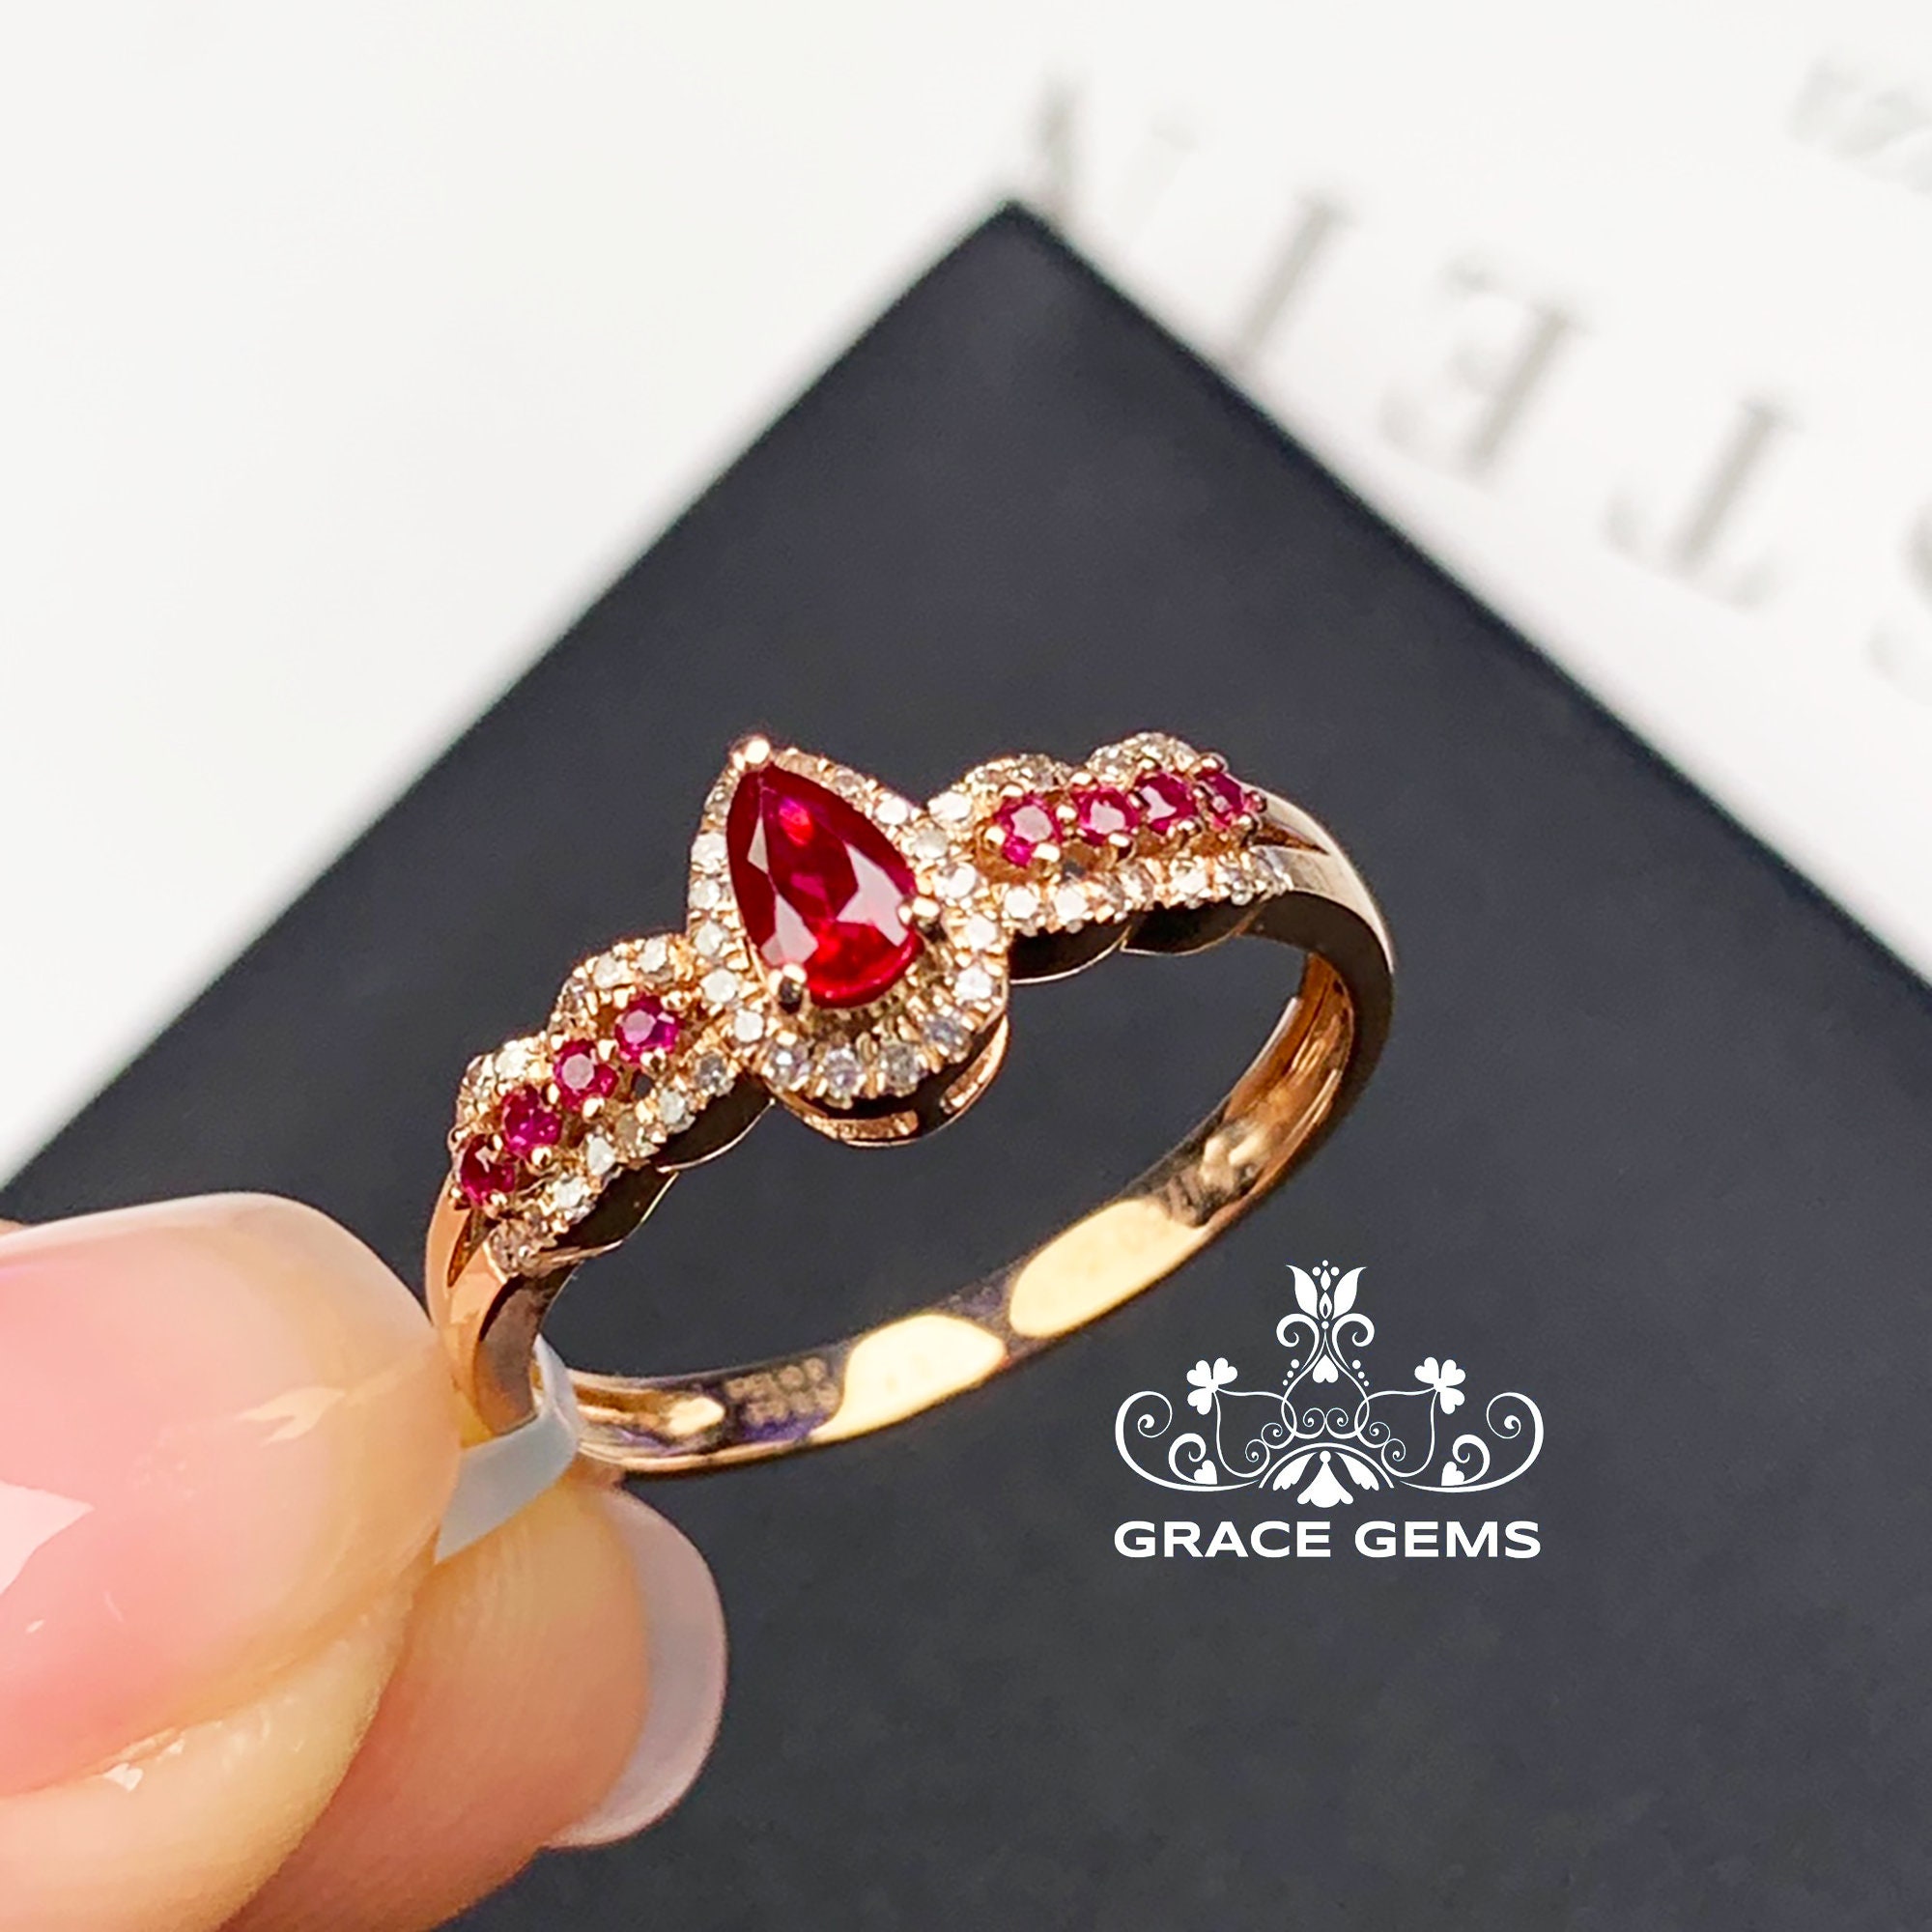 Buy Mozambique Genuine Ruby Ring/natural 18k Gold Ruby Ring/diamond Halo Ruby  Ring/real Ruby Engagement Ring/handmade Ruby Ring for Her Wedding Online in  India - Etsy